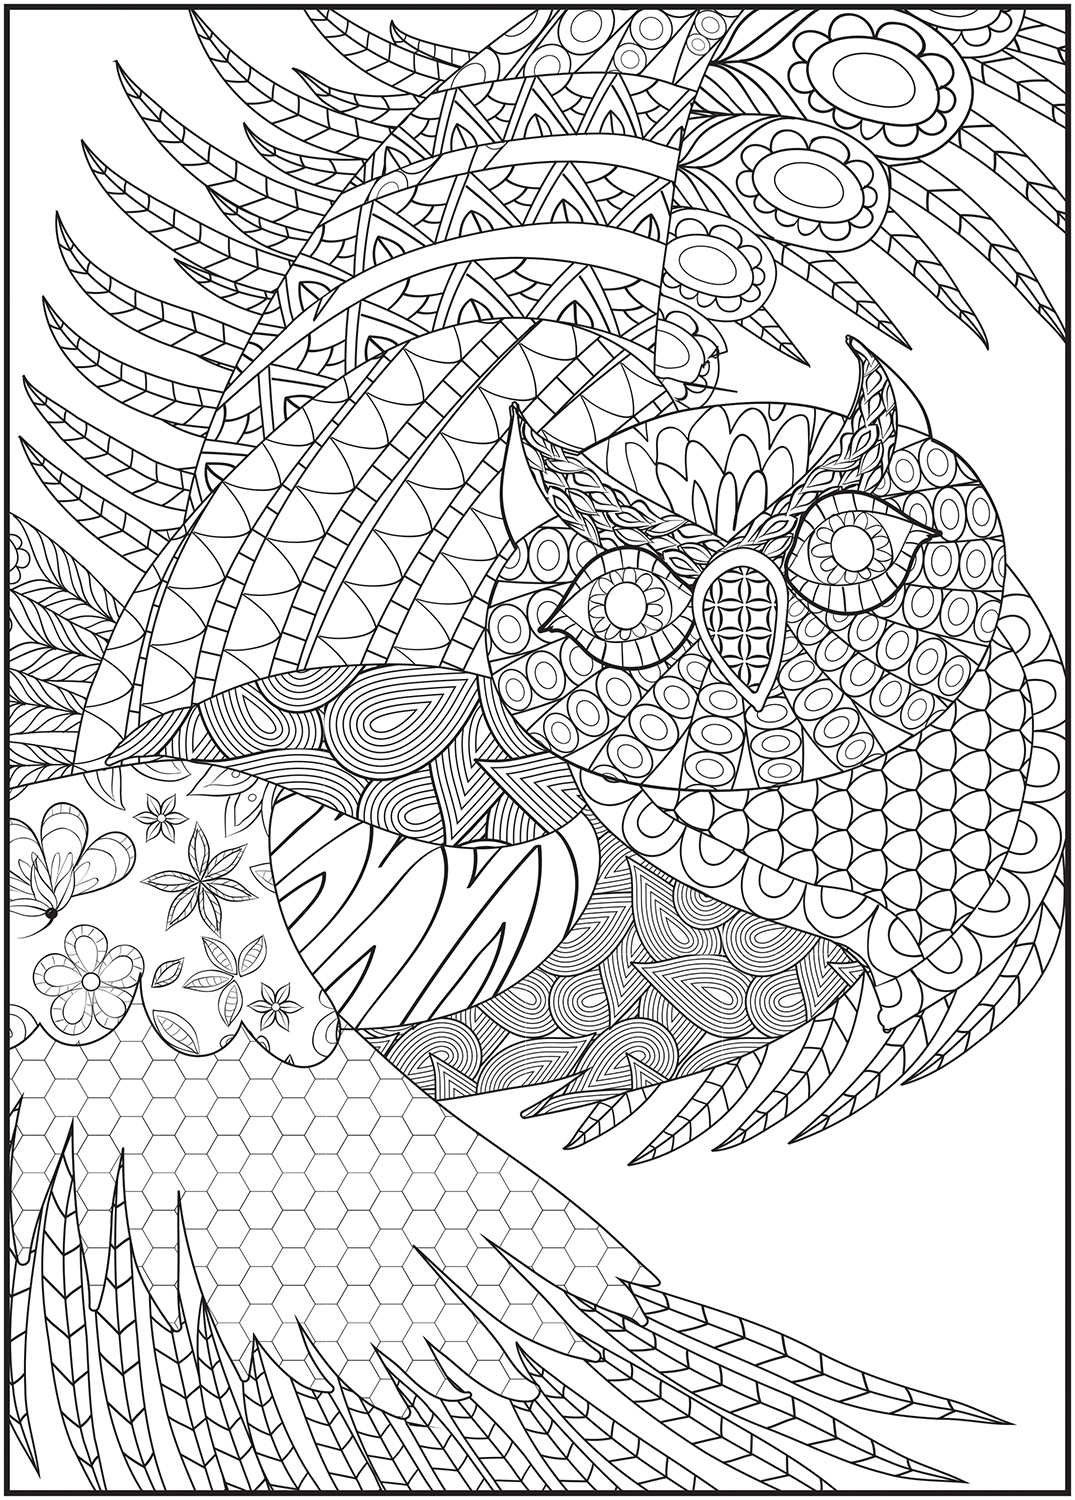 Cra-Z-Art Timeless Creations Adult Coloring Book, Wild at Heart, 64 Pages - image 4 of 10